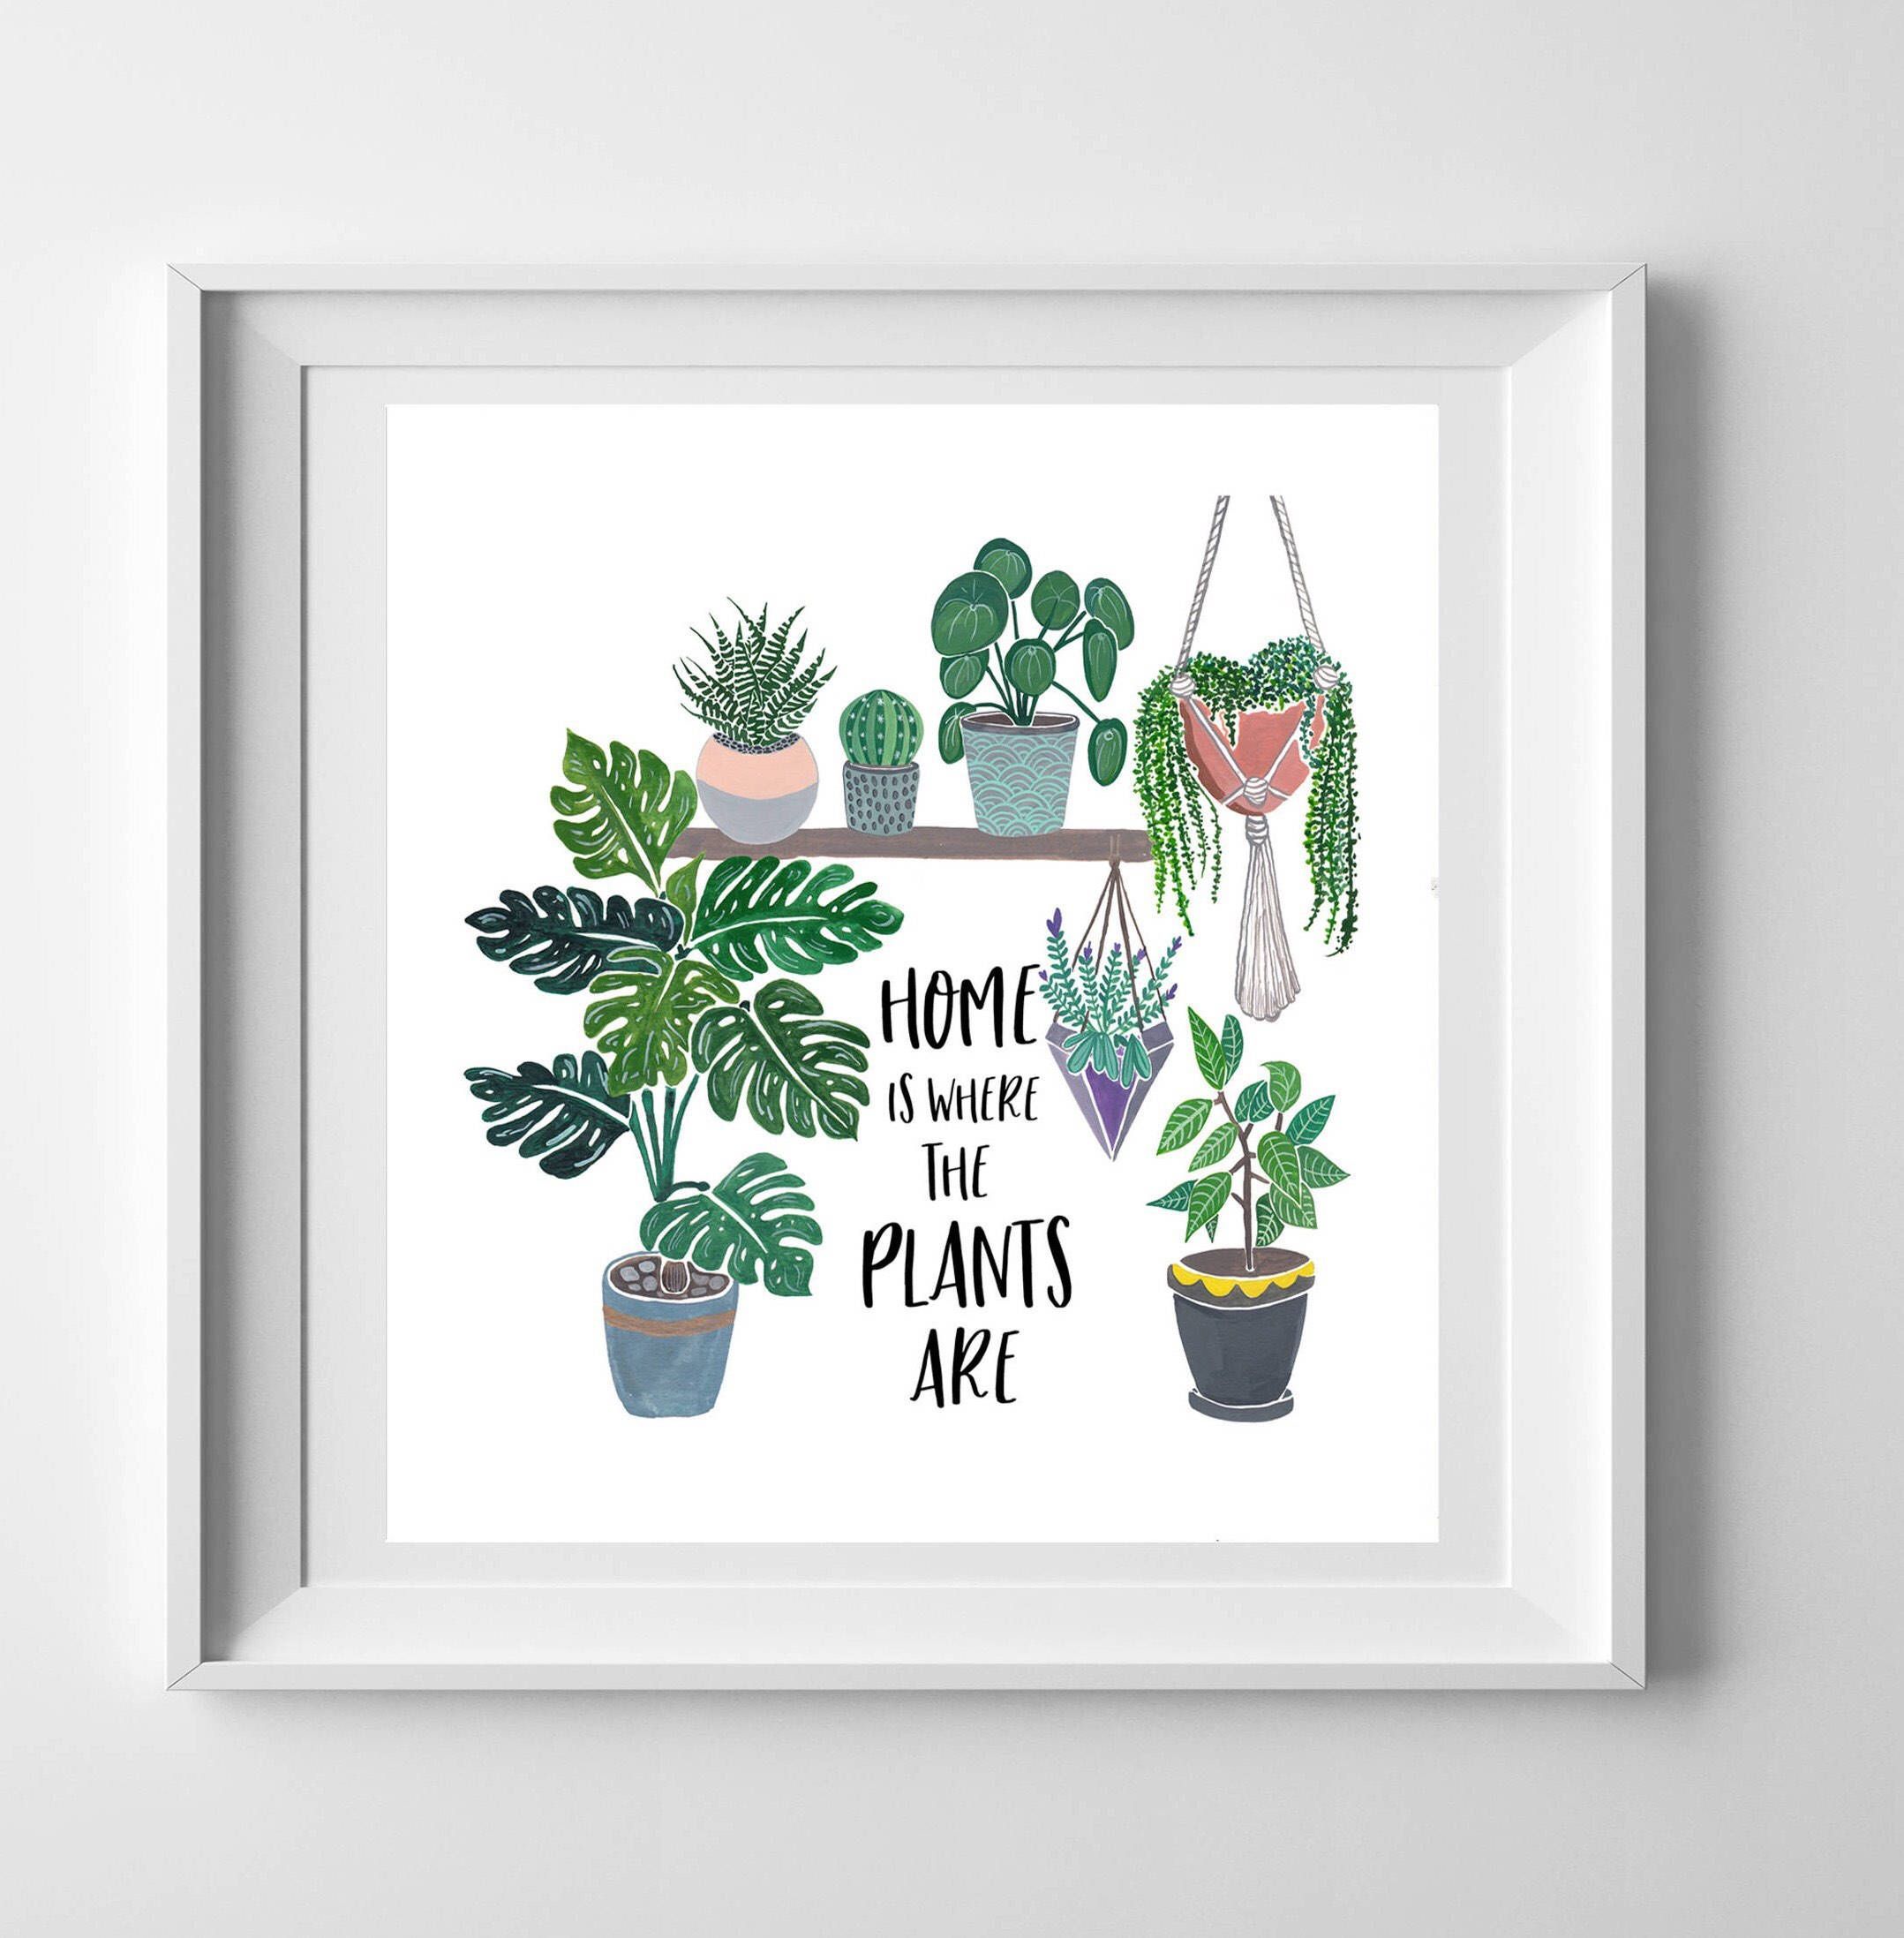 Home is where the plants are - Plant lady gift - Plant illustration - Plant lover gift - Monstera - Housewarming gift - plant print -   13 plants Illustration beautiful
 ideas